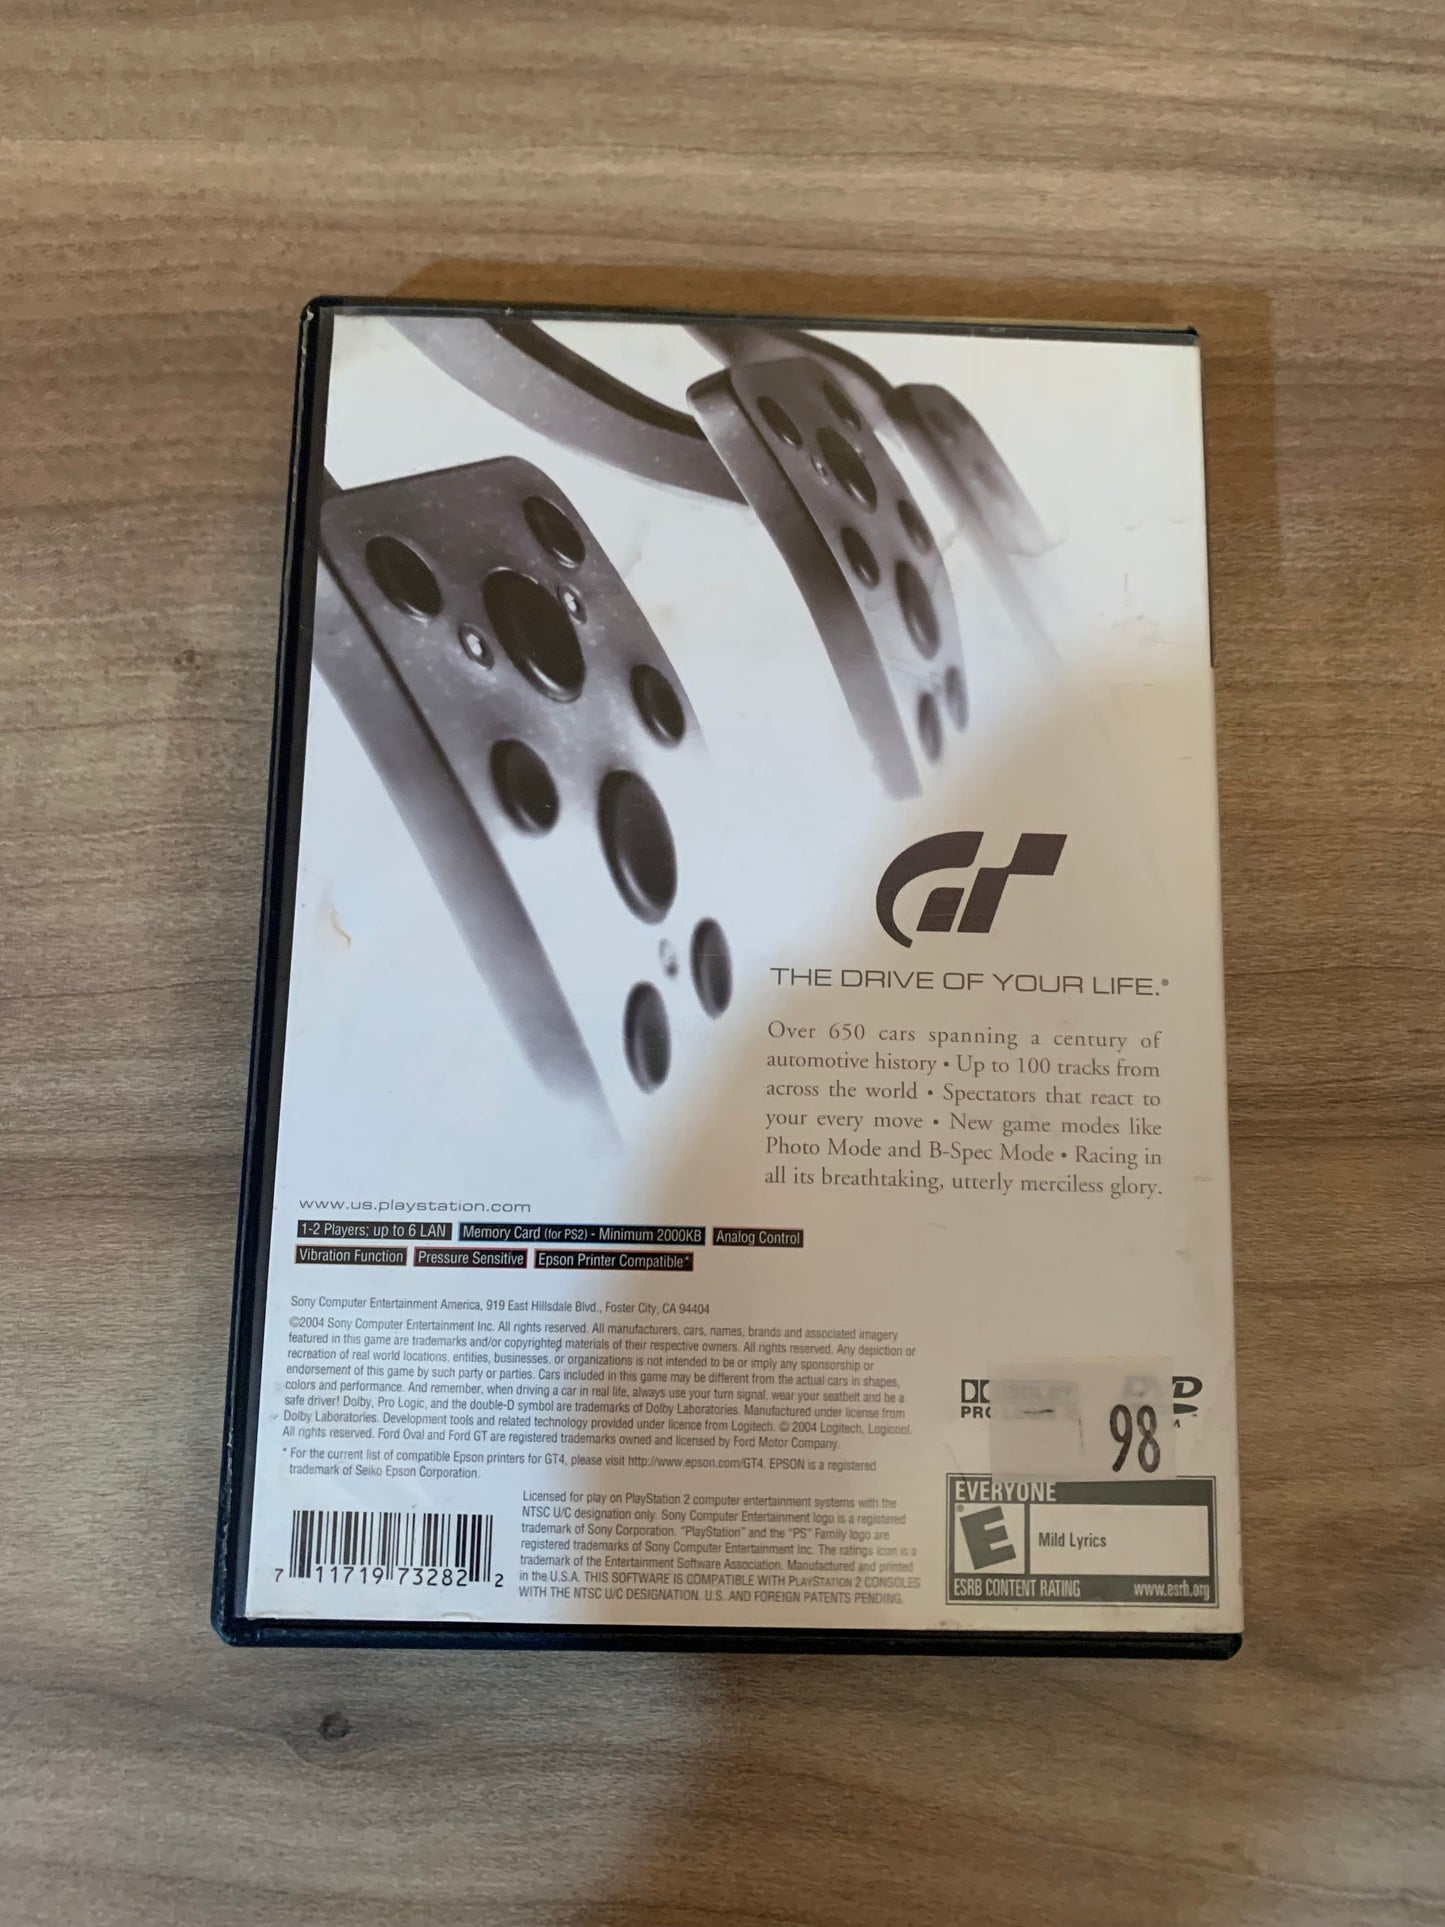 SONY PLAYSTATiON 2 [PS2] | GRAN TURiSMO 4 GT4 THE REAL DRiViNG SIMULATOR